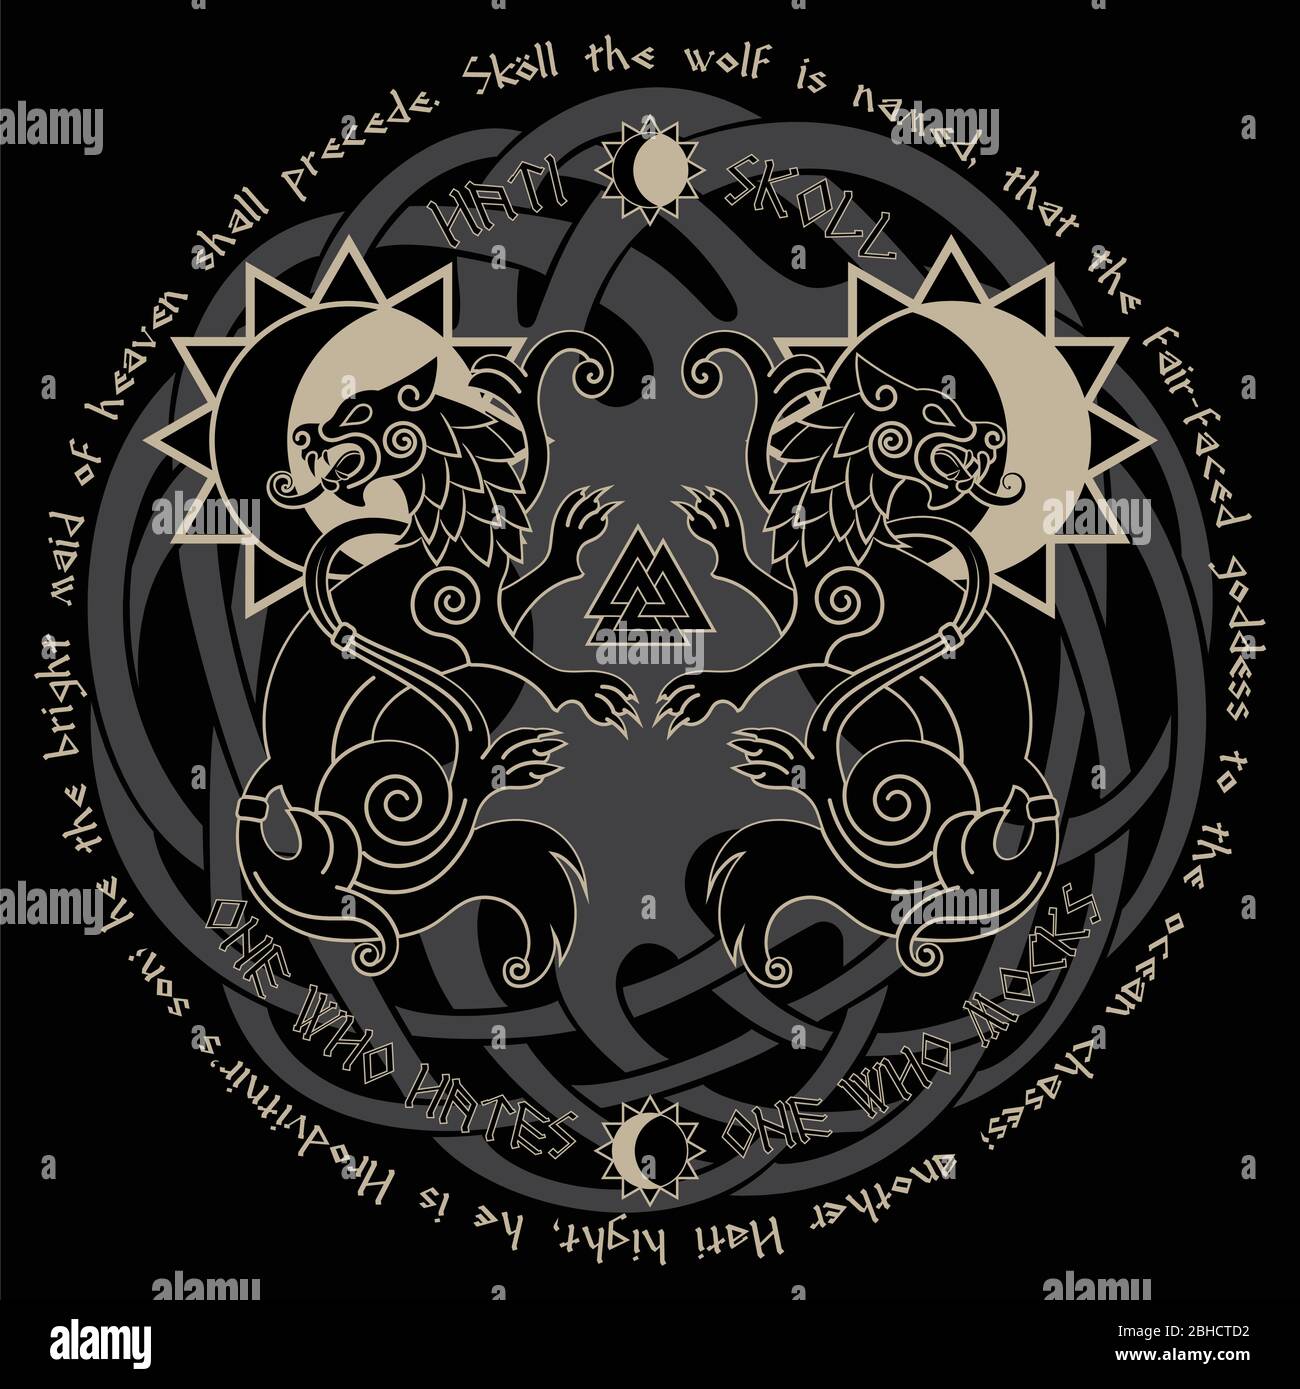 Two Wolves From Norse Mythology Hati And Skoll Devour The Sun And The Moon Stock Vector Image Art Alamy